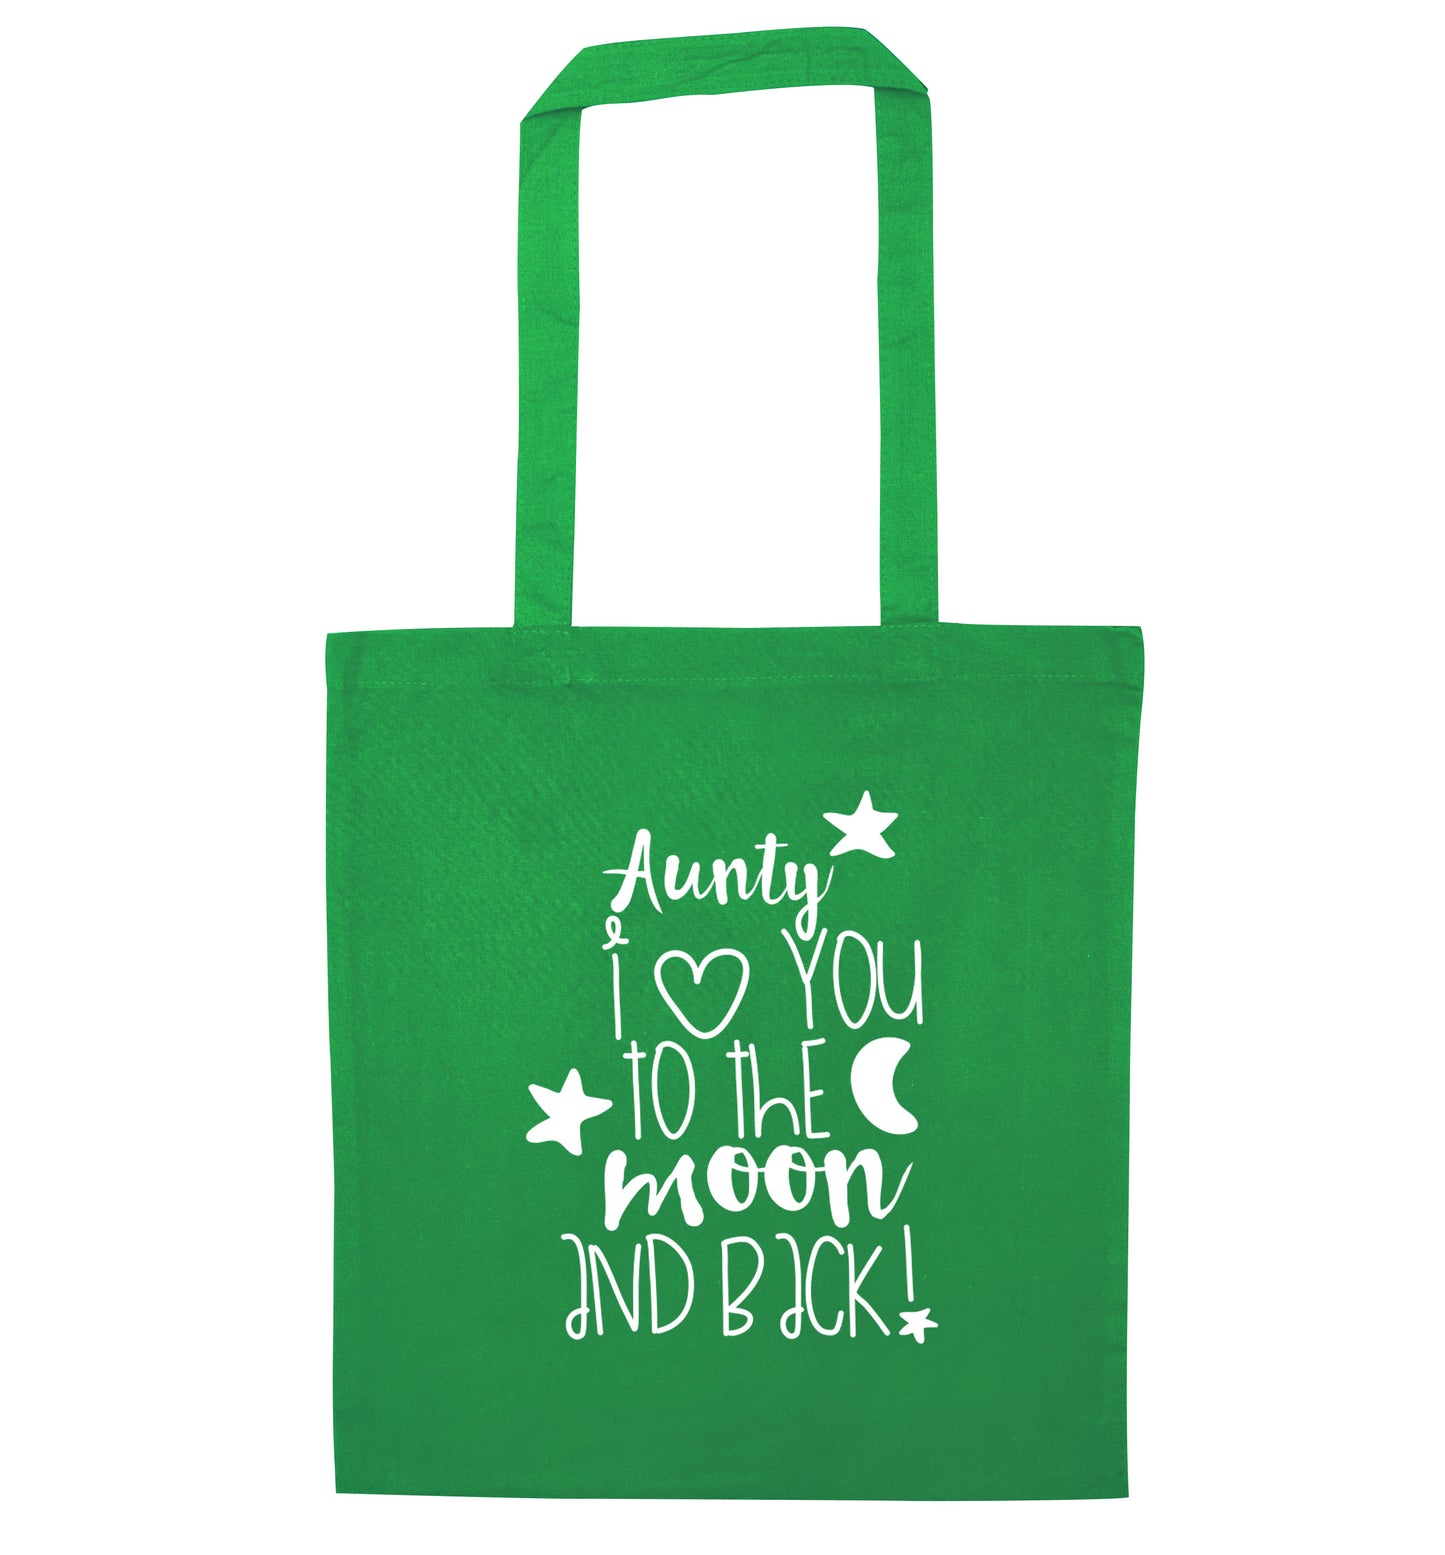 Aunty I love you to the moon and back green tote bag